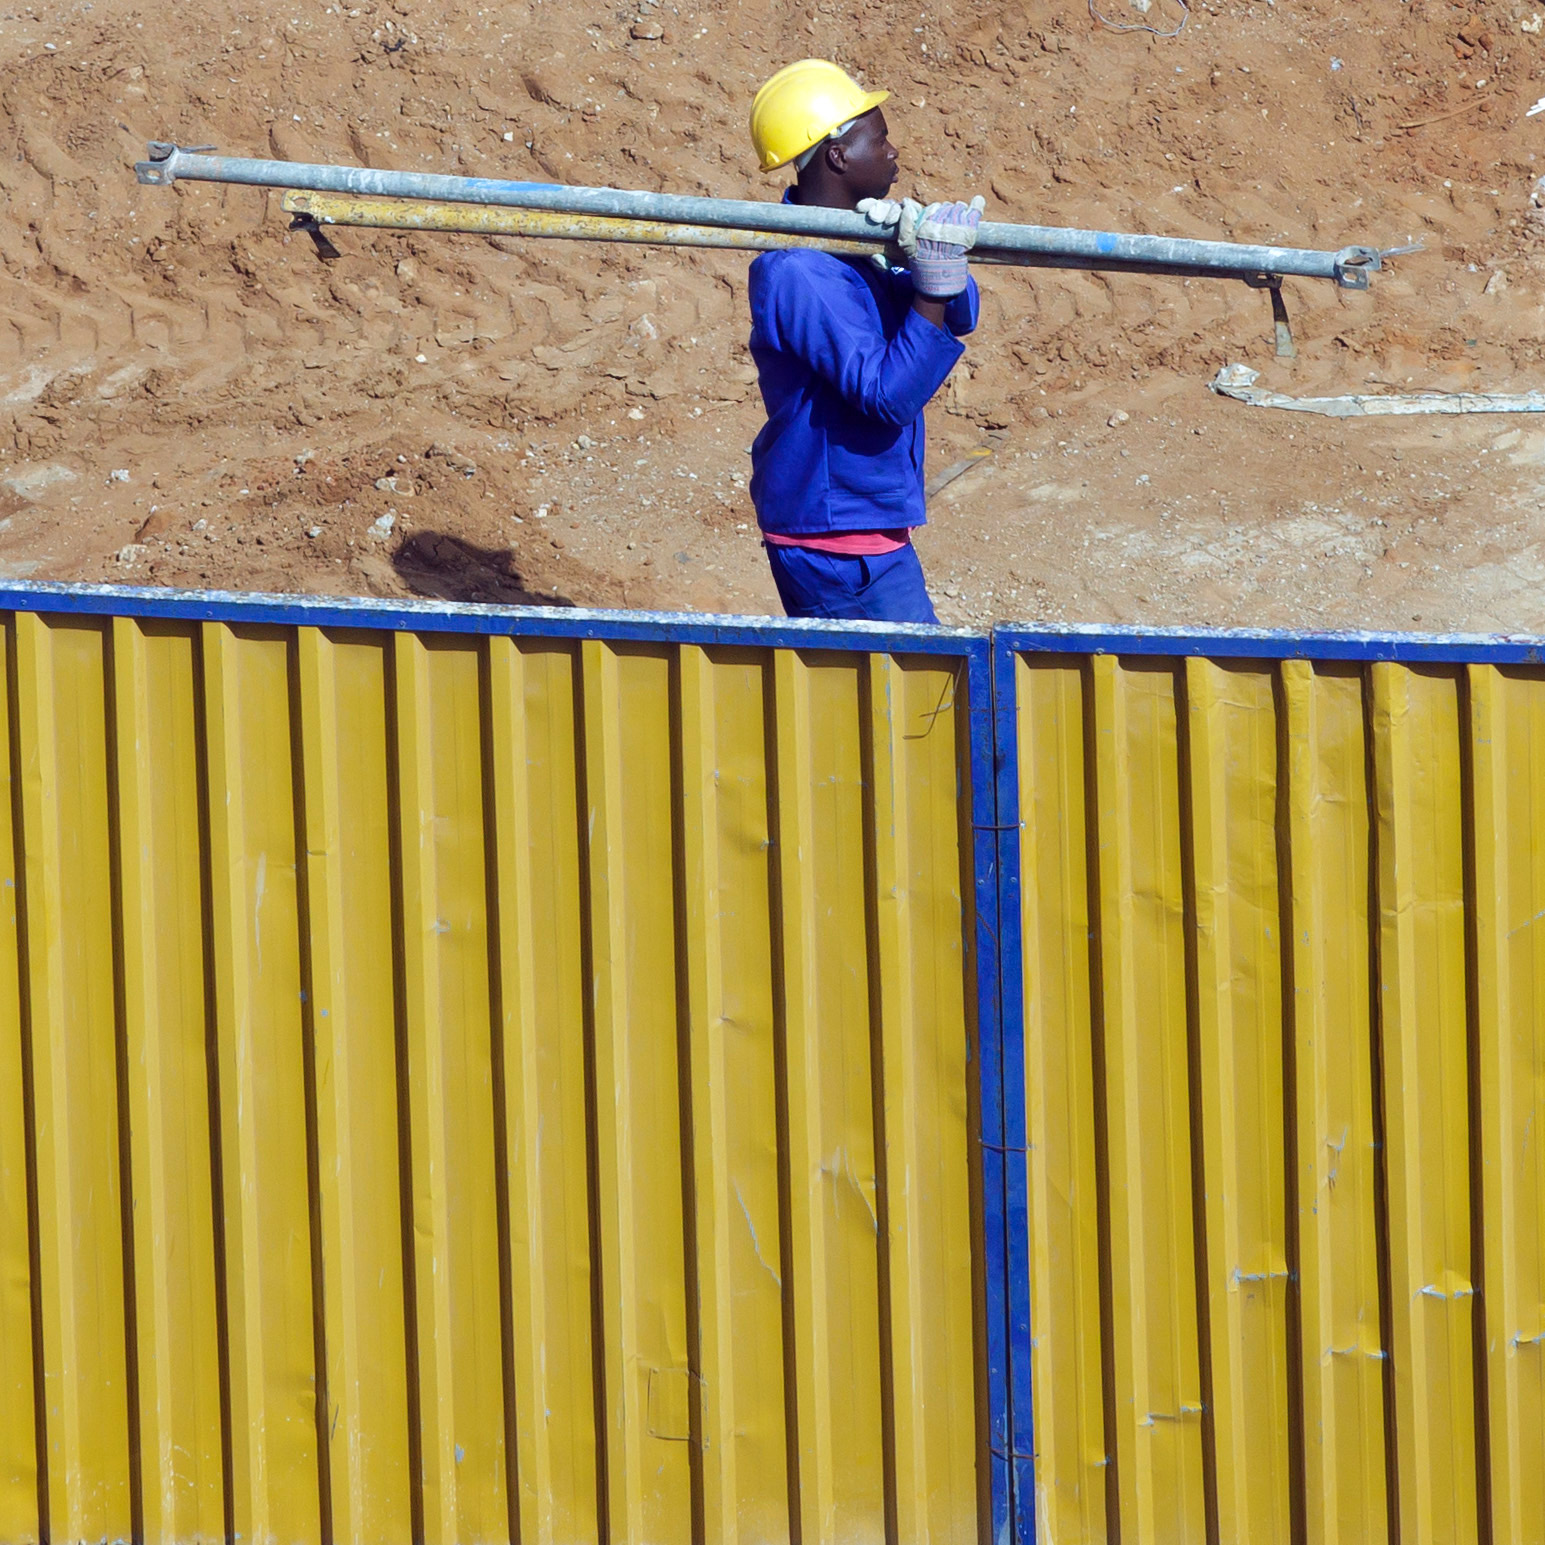 A construction worker carries steel pipes across a construction site in Mozambique's capital Maputo.